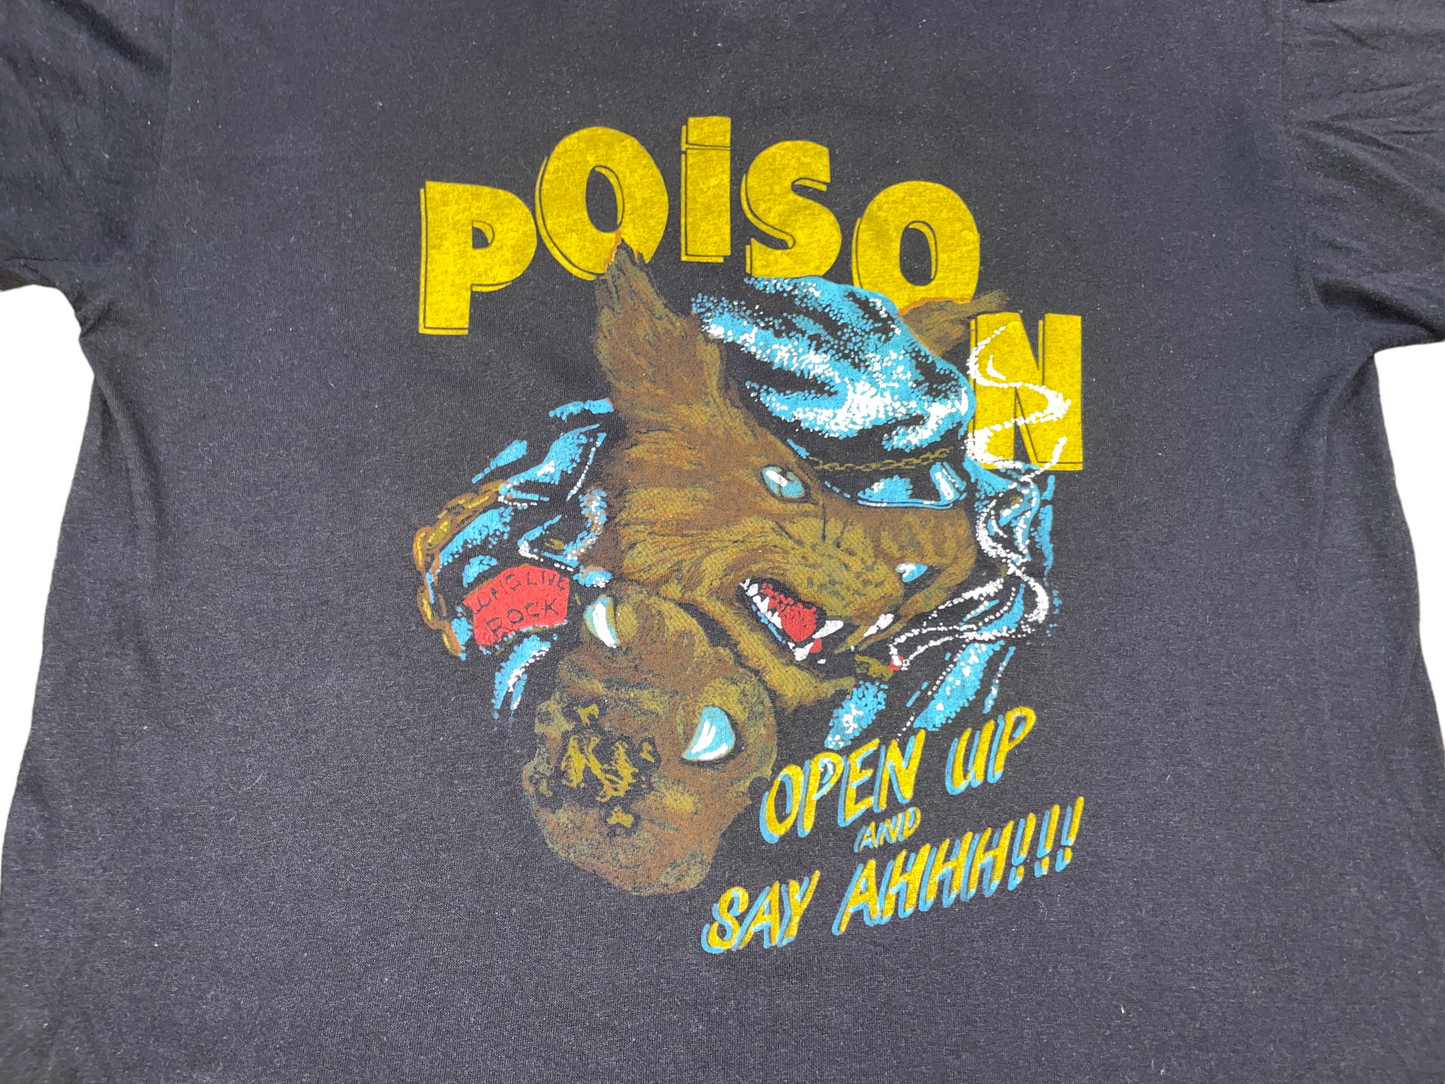 Vintage 80's Poison Open Up and Say AHHH!!! T-Shirt